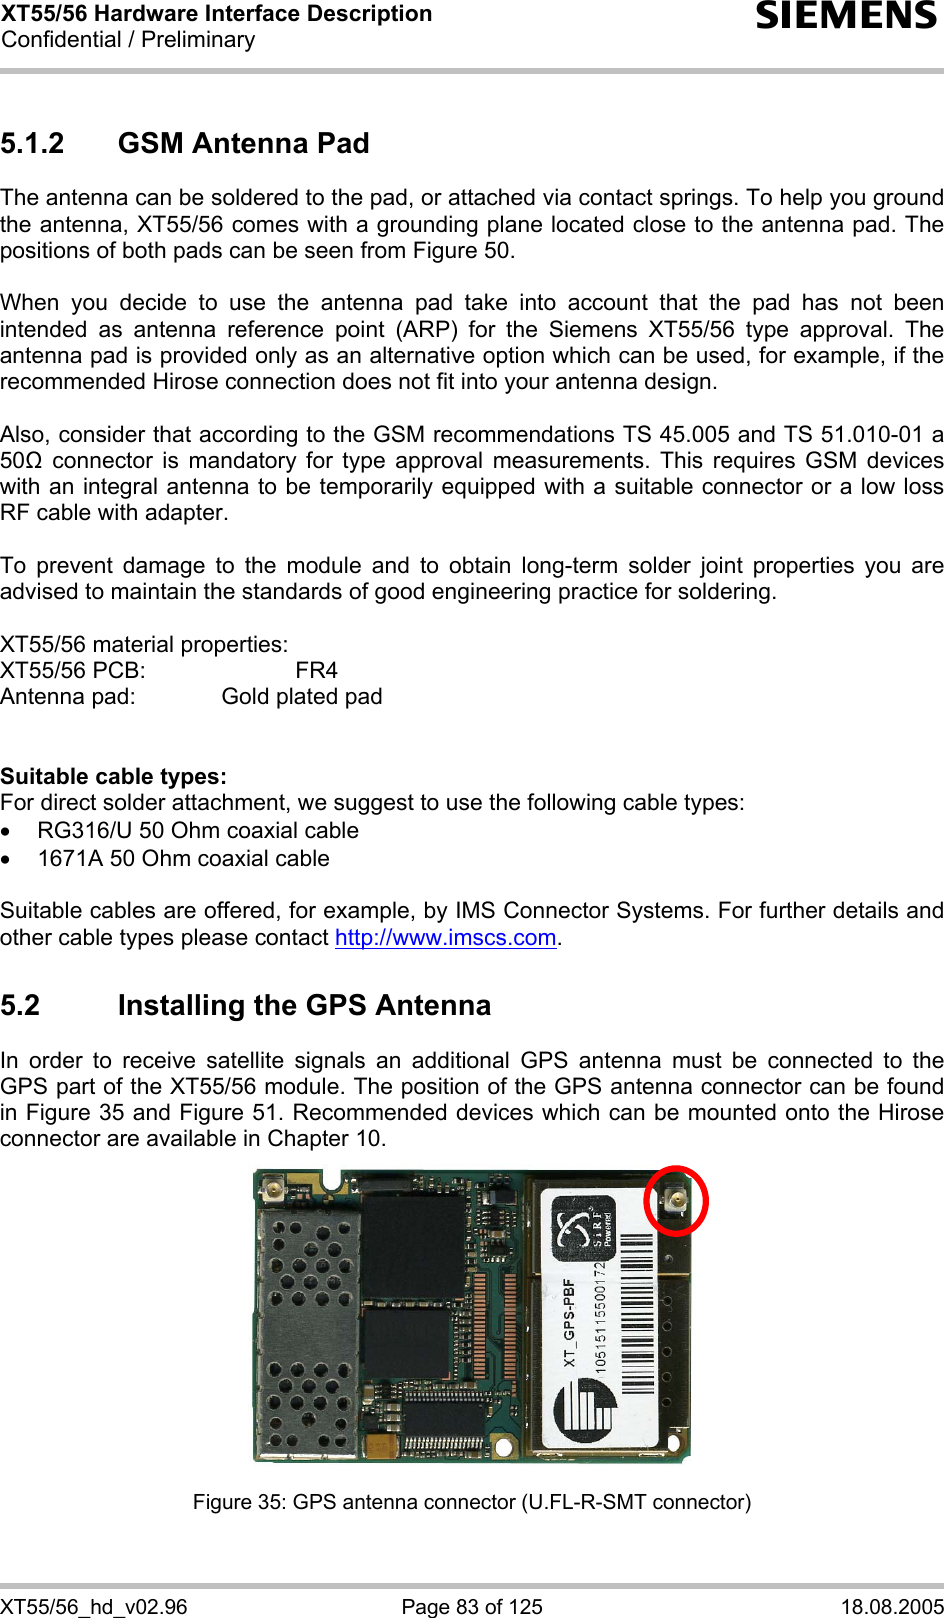 XT55/56 Hardware Interface Description Confidential / Preliminary s XT55/56_hd_v02.96  Page 83 of 125  18.08.2005 5.1.2  GSM Antenna Pad The antenna can be soldered to the pad, or attached via contact springs. To help you ground the antenna, XT55/56 comes with a grounding plane located close to the antenna pad. The positions of both pads can be seen from Figure 50.  When you decide to use the antenna pad take into account that the pad has not been intended as antenna reference point (ARP) for the Siemens XT55/56 type approval. The antenna pad is provided only as an alternative option which can be used, for example, if the recommended Hirose connection does not fit into your antenna design.   Also, consider that according to the GSM recommendations TS 45.005 and TS 51.010-01 a 50 connector is mandatory for type approval measurements. This requires GSM devices with an integral antenna to be temporarily equipped with a suitable connector or a low loss RF cable with adapter.   To prevent damage to the module and to obtain long-term solder joint properties you are advised to maintain the standards of good engineering practice for soldering.  XT55/56 material properties: XT55/56 PCB:     FR4 Antenna pad:    Gold plated pad   Suitable cable types: For direct solder attachment, we suggest to use the following cable types: •  RG316/U 50 Ohm coaxial cable  •  1671A 50 Ohm coaxial cable  Suitable cables are offered, for example, by IMS Connector Systems. For further details and other cable types please contact http://www.imscs.com. 5.2  Installing the GPS Antenna In order to receive satellite signals an additional GPS antenna must be connected to the GPS part of the XT55/56 module. The position of the GPS antenna connector can be found in Figure 35 and Figure 51. Recommended devices which can be mounted onto the Hirose connector are available in Chapter 10.  Figure 35: GPS antenna connector (U.FL-R-SMT connector) 